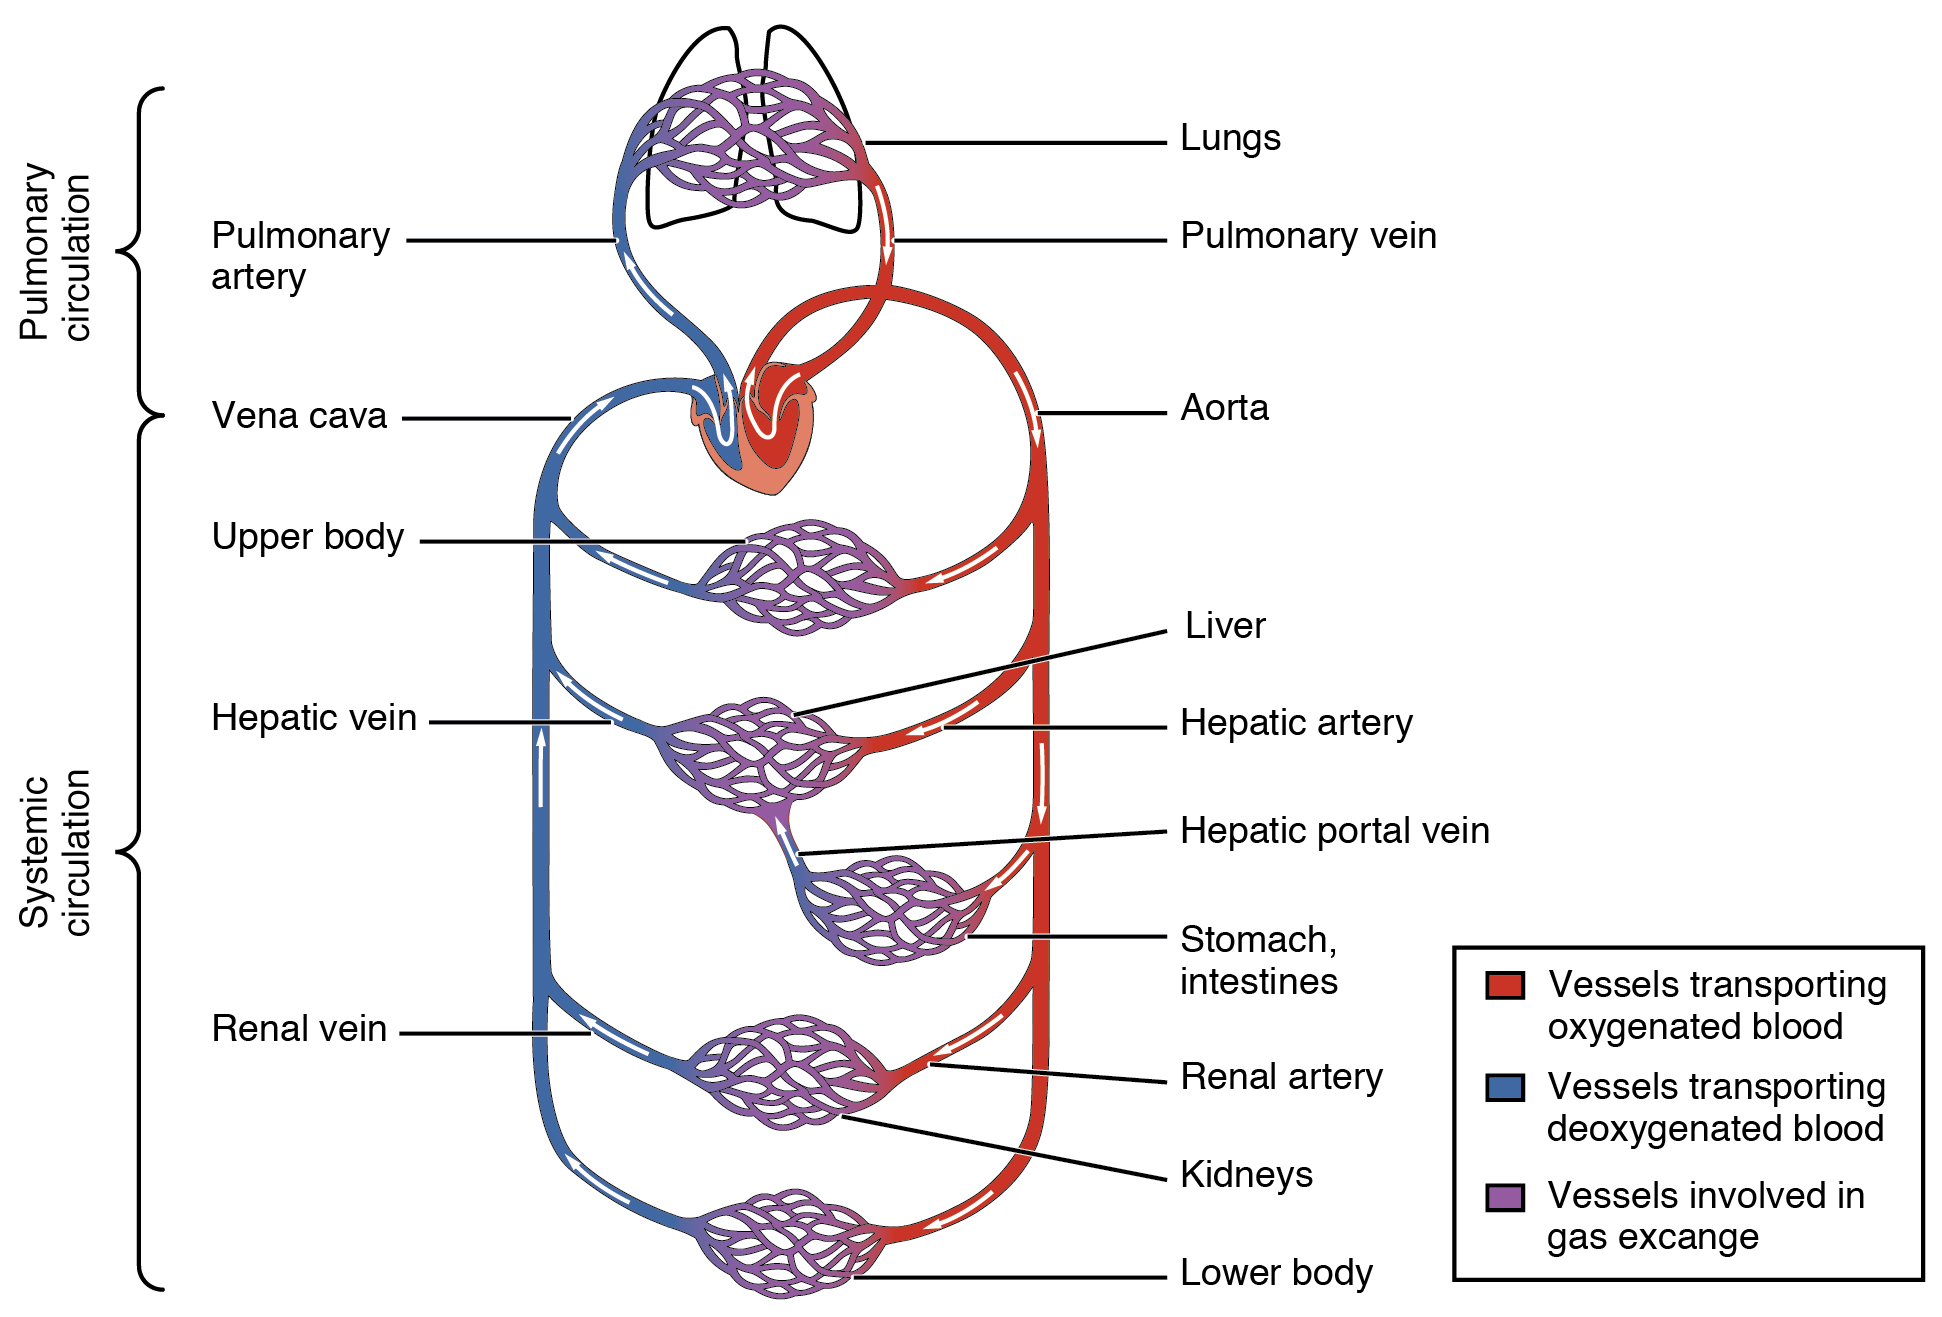 Oxgenated and deoxygenated blood flow through the major organs. Image description available.